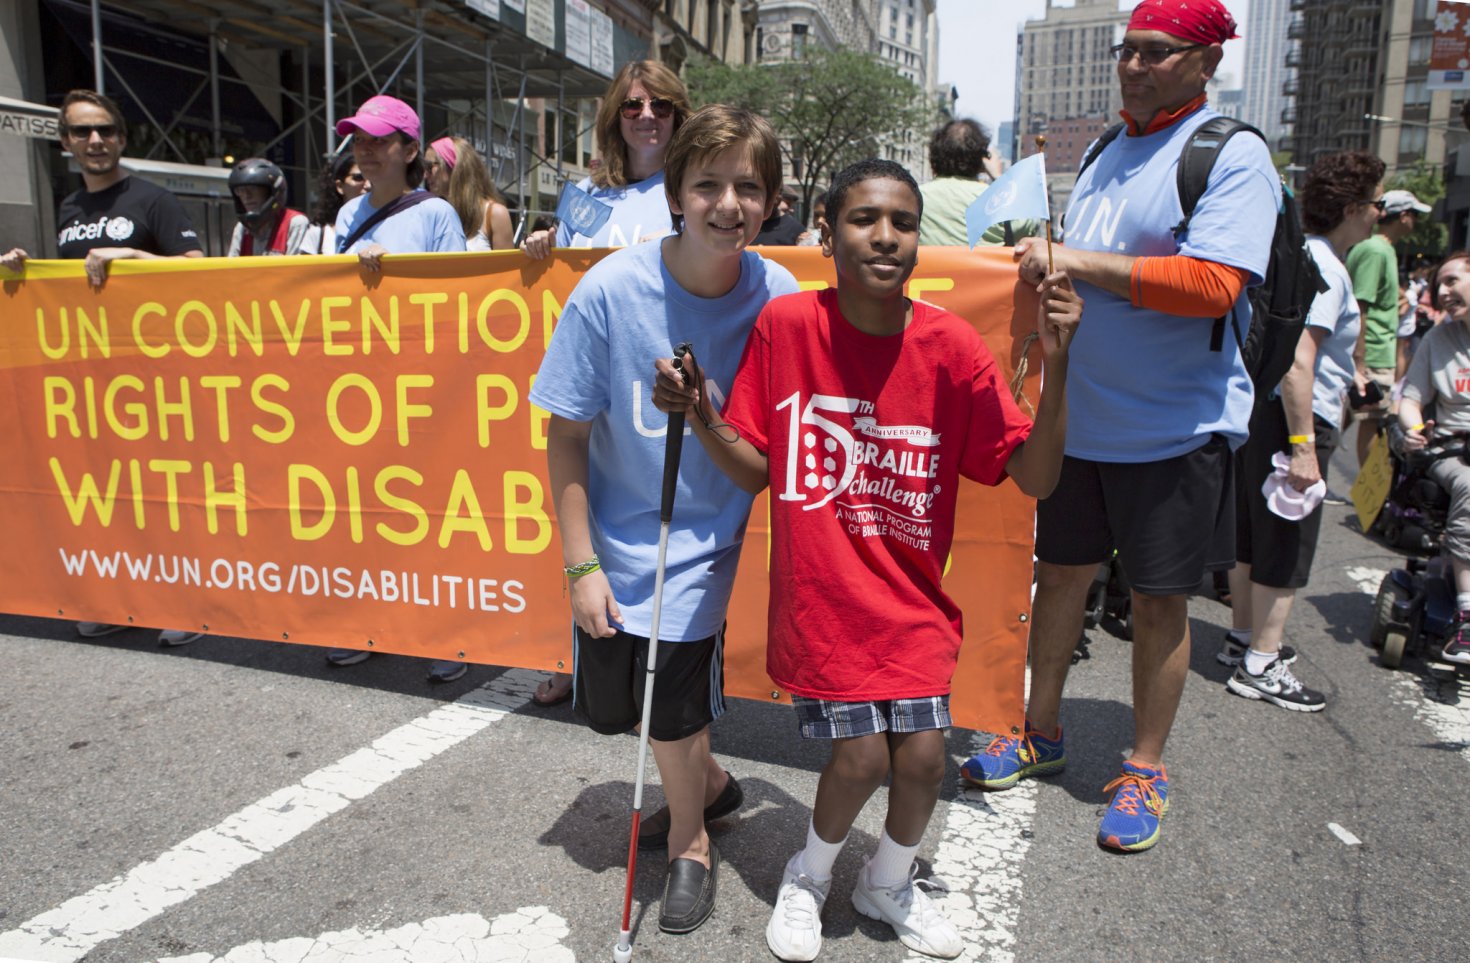 Disabled Teenager marching through the parade